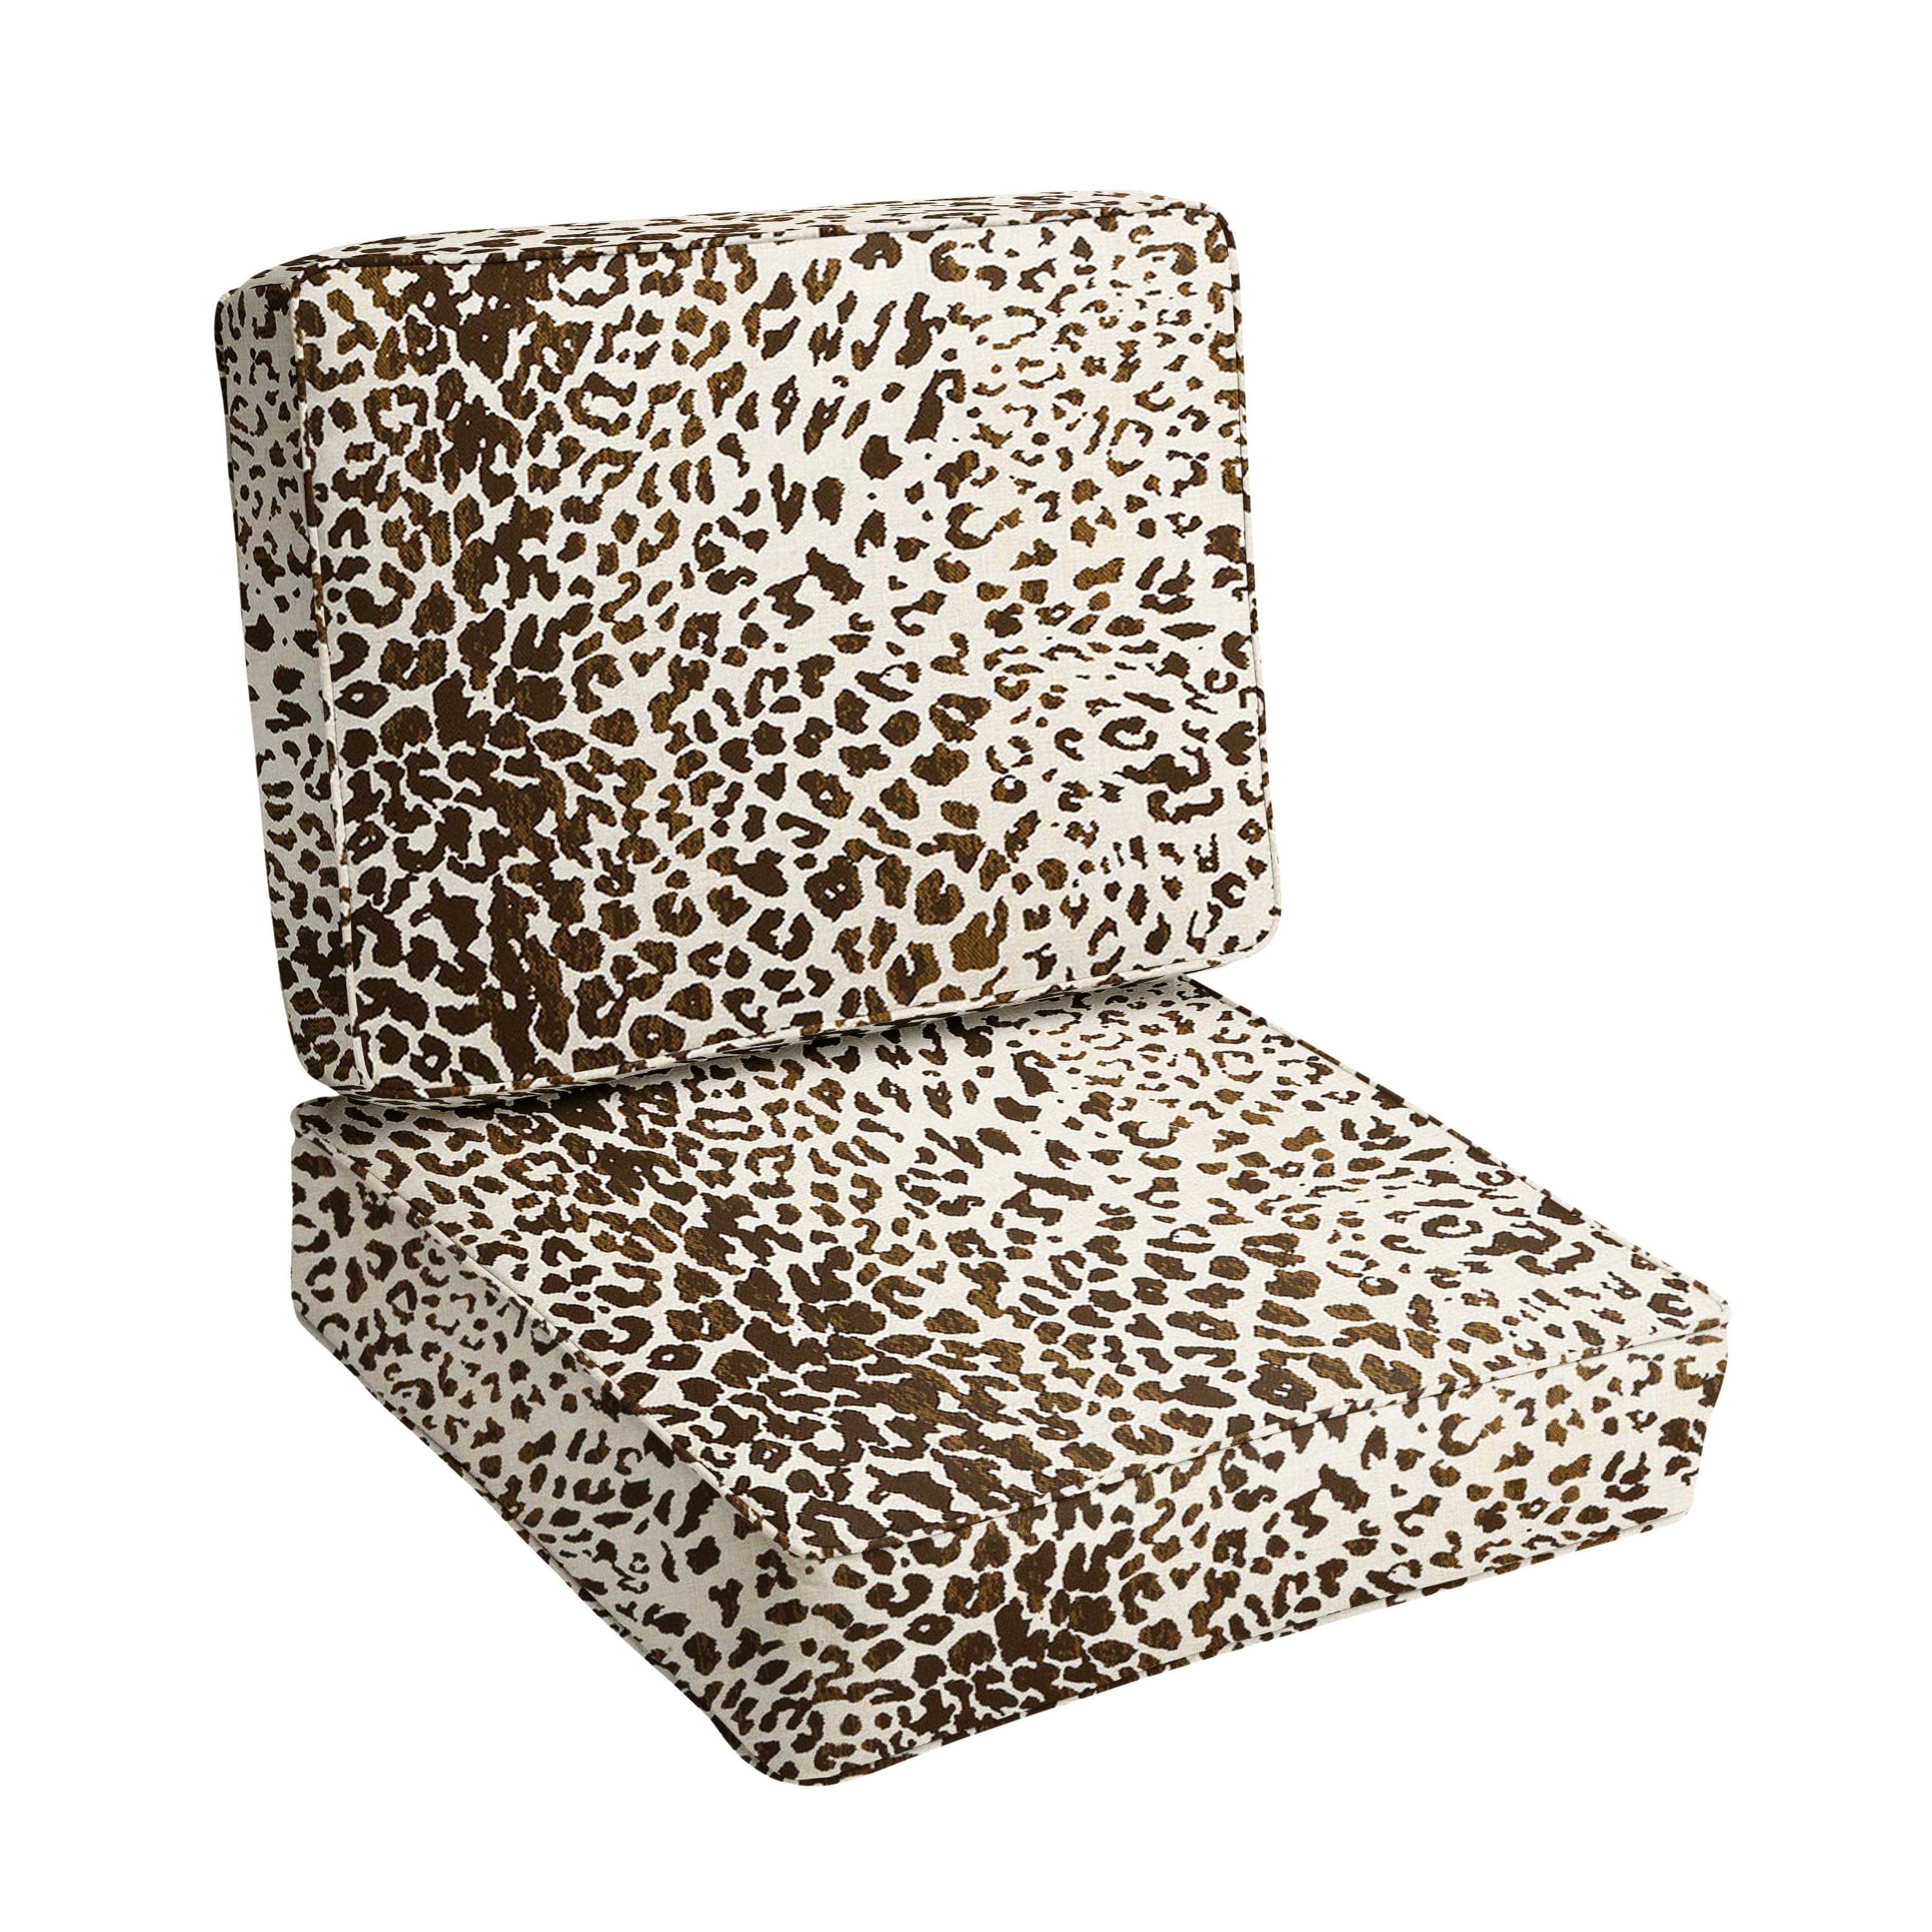 https://ak1.ostkcdn.com/images/products/is/images/direct/41e0b446857f30ee31cb320ff2c501f8f814f78a/Sunbrella-Tan-Leopard-Indoor-Outdoor-Cushion-Set%2C-Corded.jpg